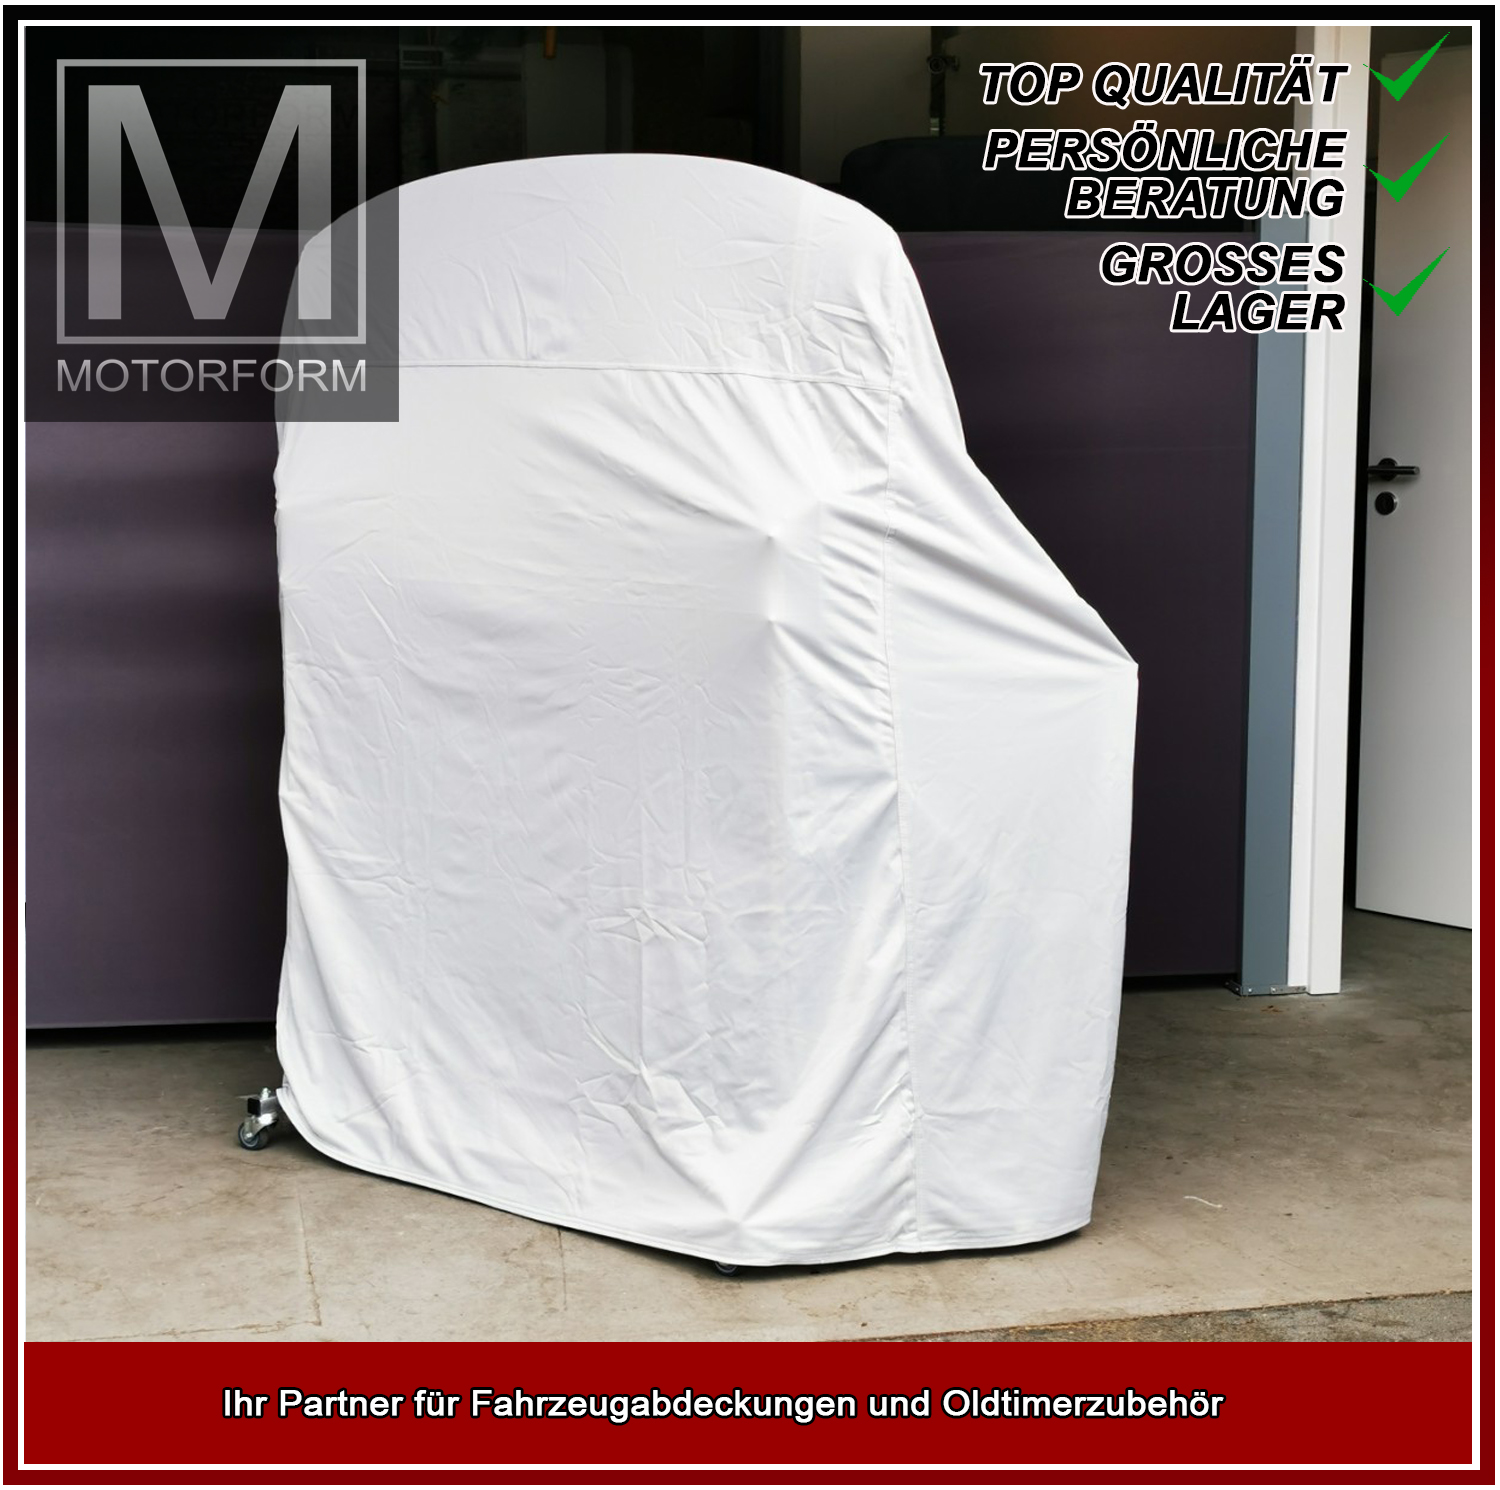 Silver Series Hardtop-Cover for Hardtop-Cover Mercedes R129 W129